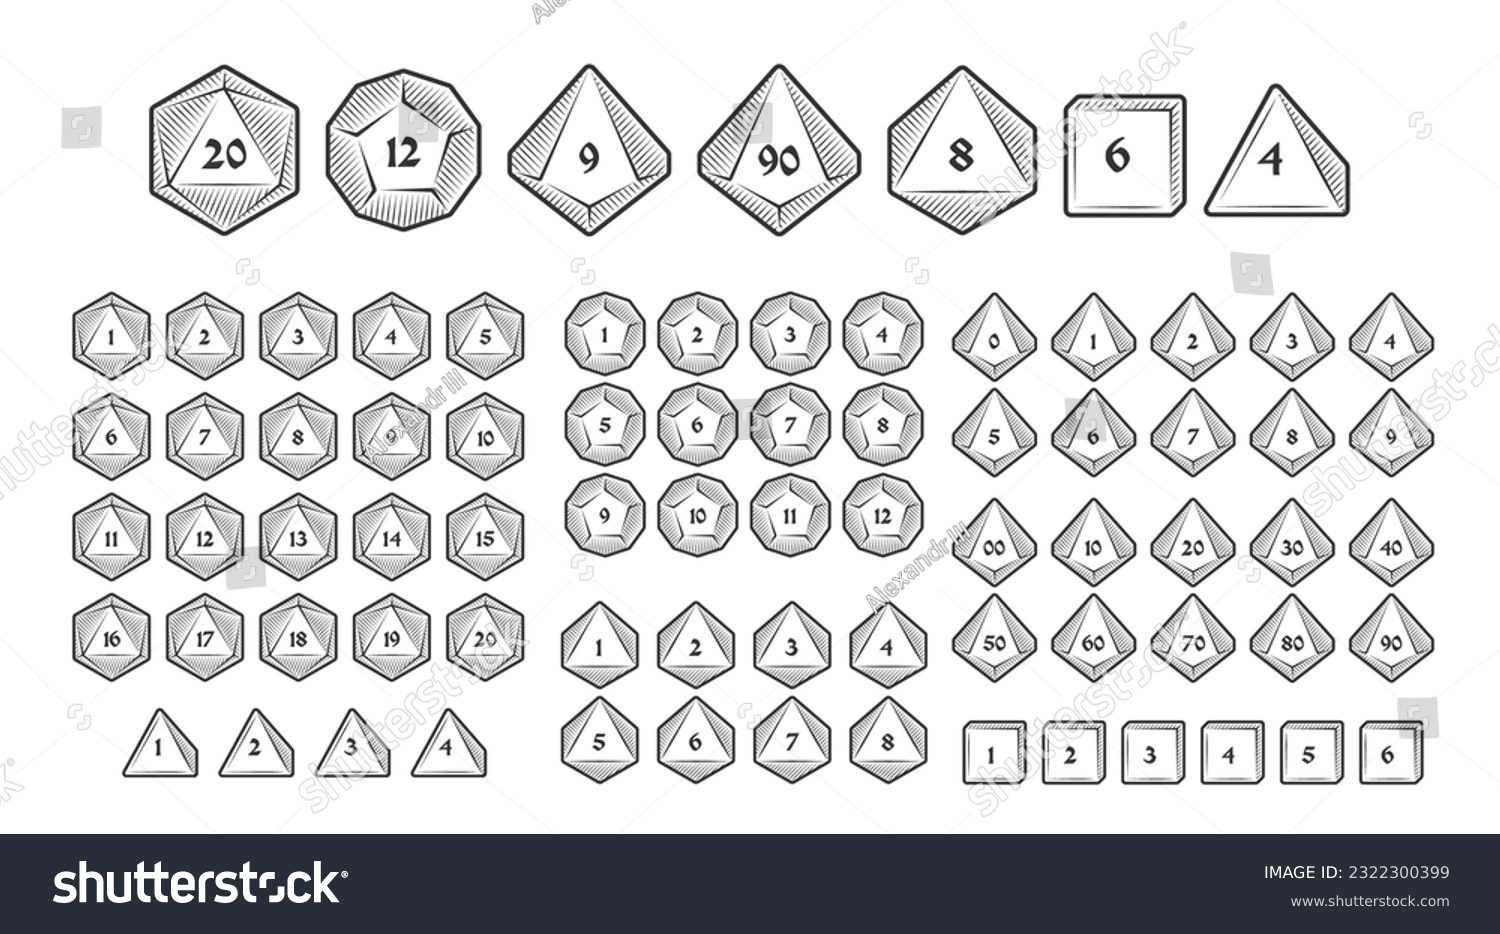 SVG of D4, D6, D8, D10, D12, and D20 Dice Icons for Board Games With Numbers, Line Style With Hatching svg